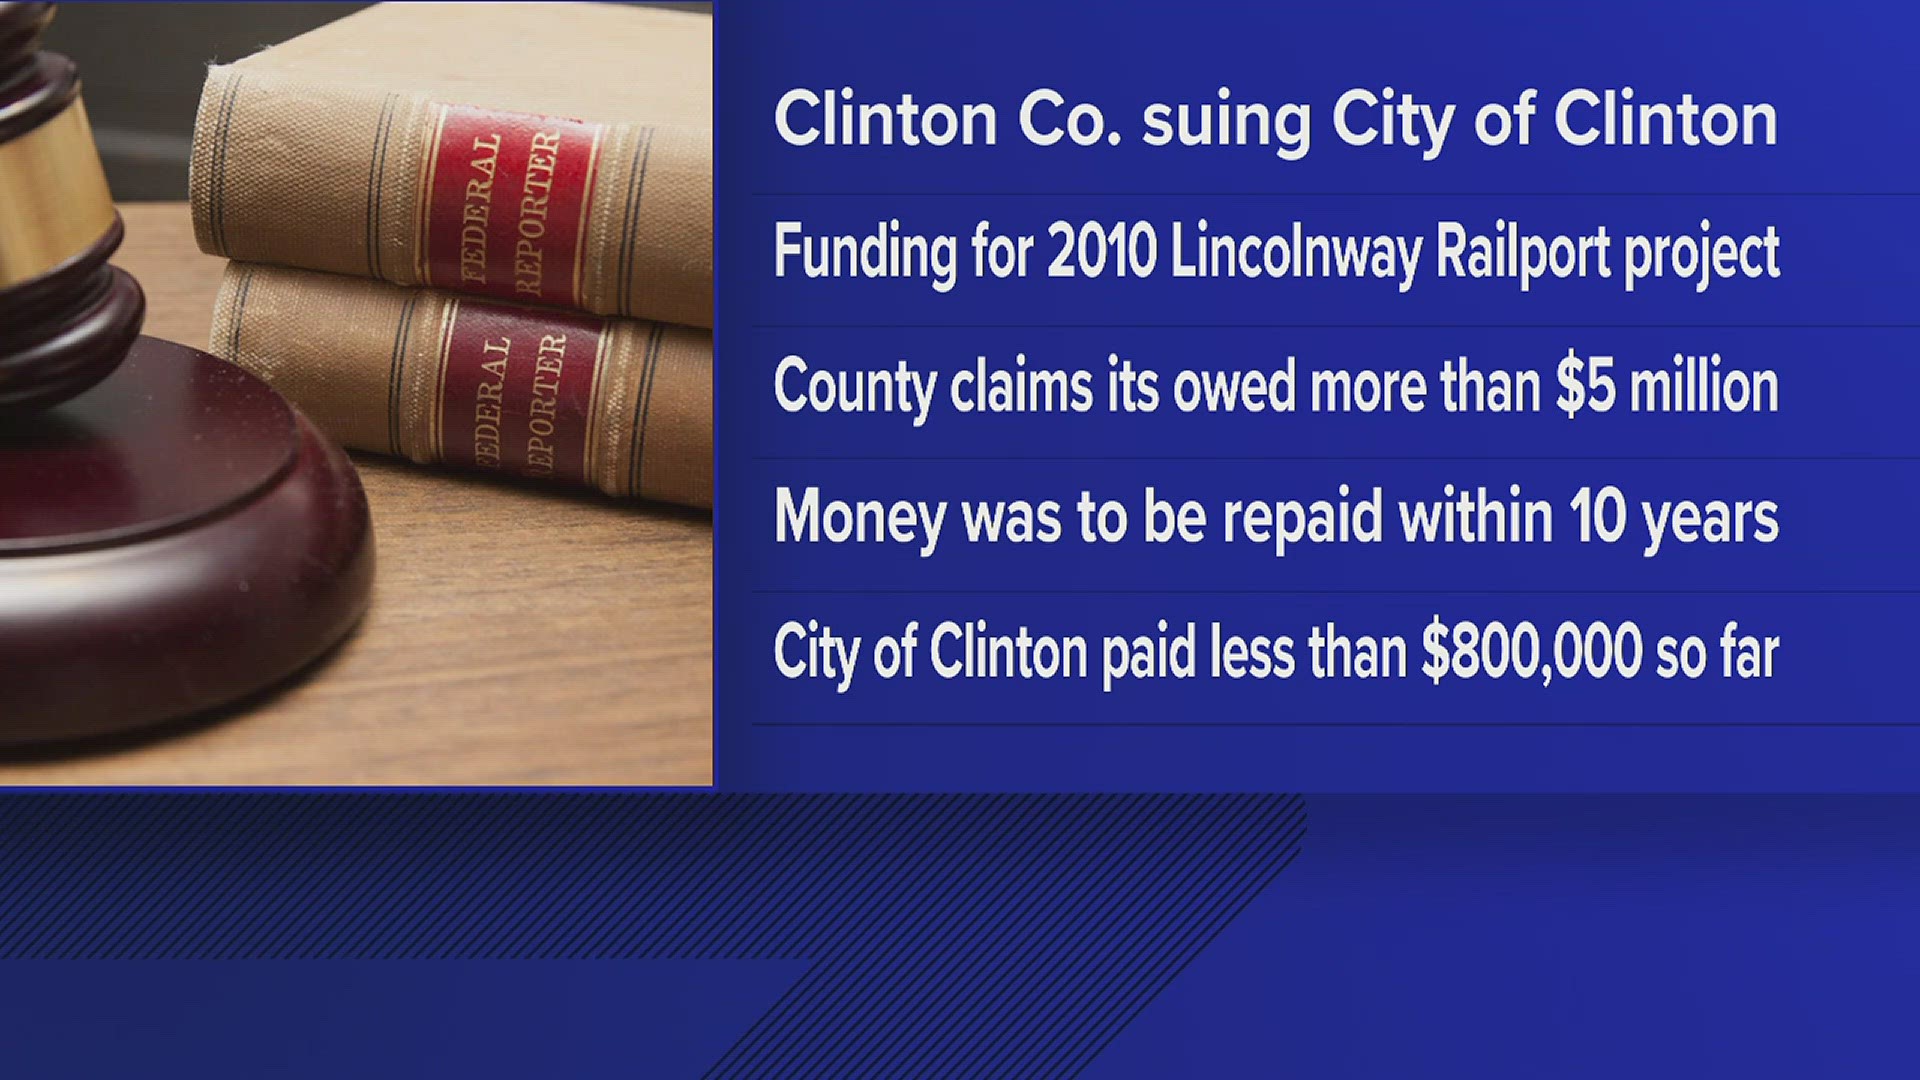 According to the lawsuit, the city has only paid $800,000 of a $6 million fund it promised to pay back over ten years starting in 2010.